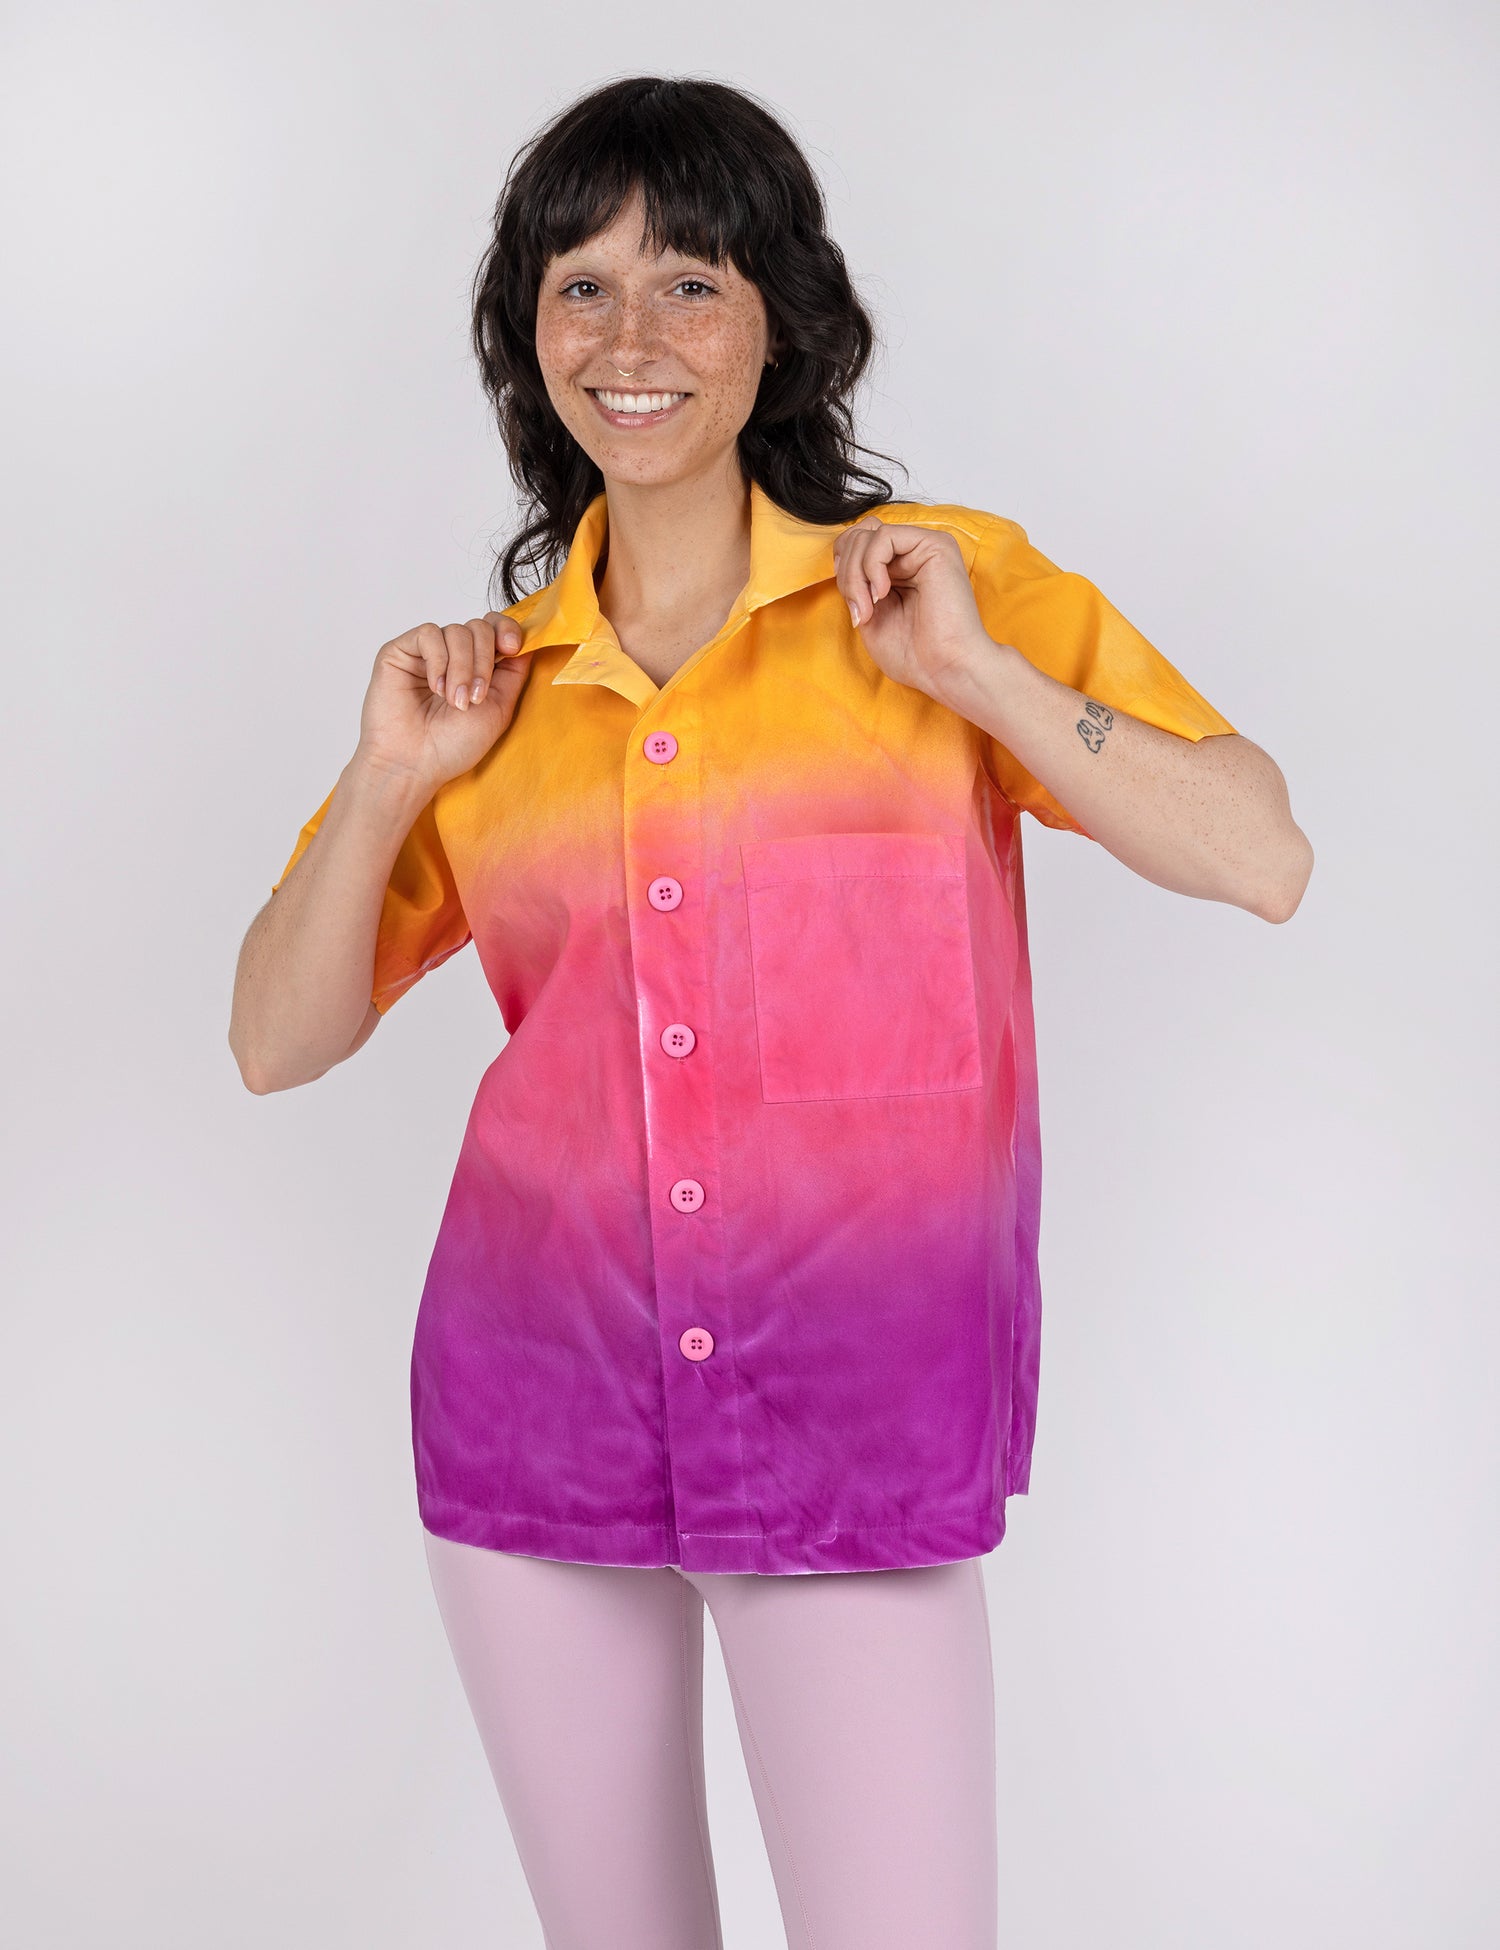 woman wearing a button down shirt in gradient designs of yellow pink and purple.